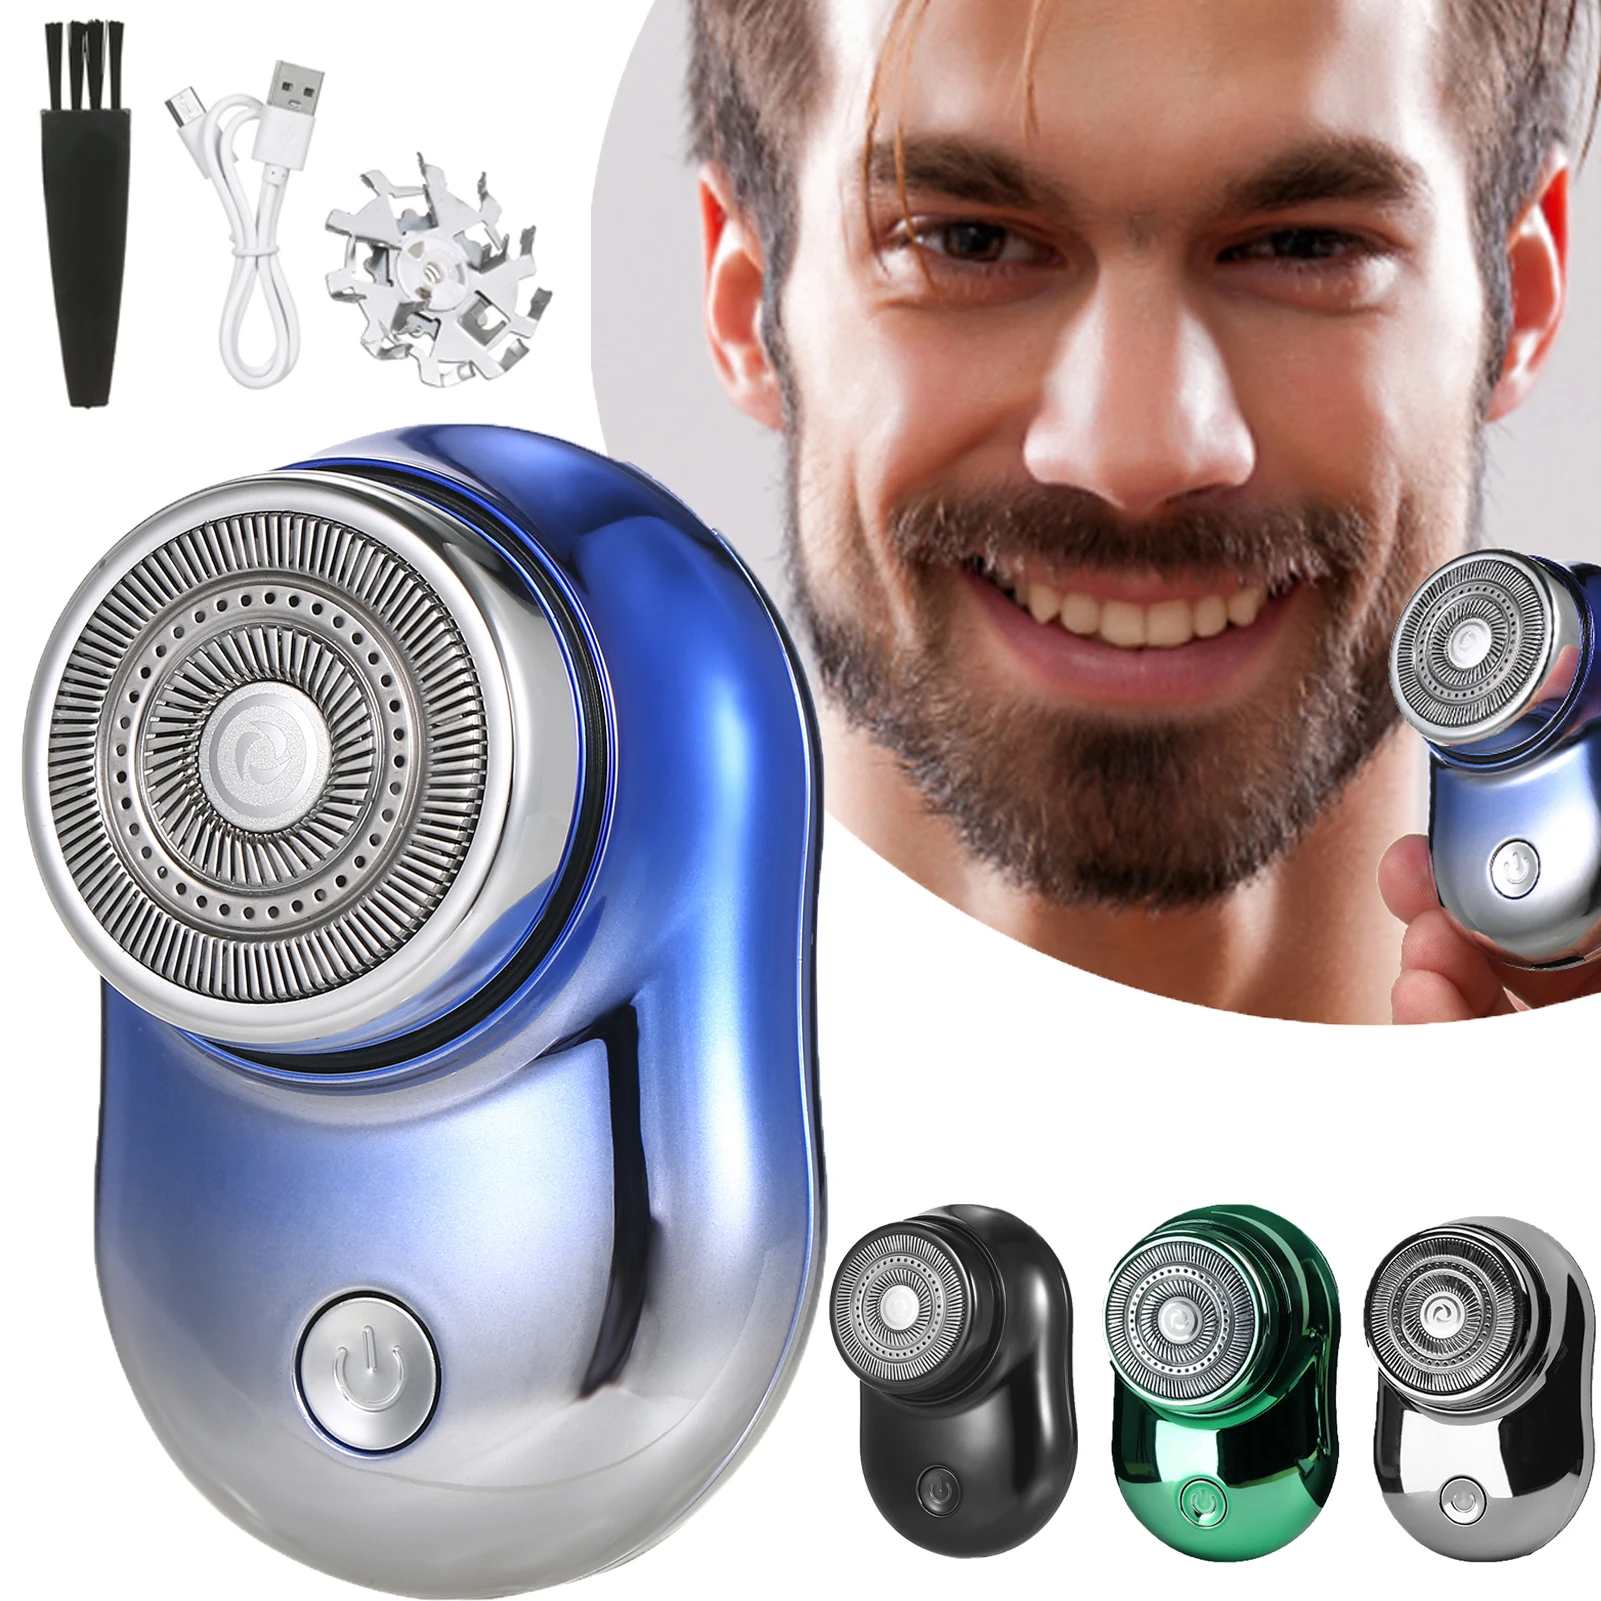 Rechargeable Portable Shaver USB Cordless Electric Shaver Beard Razor We... - $23.62